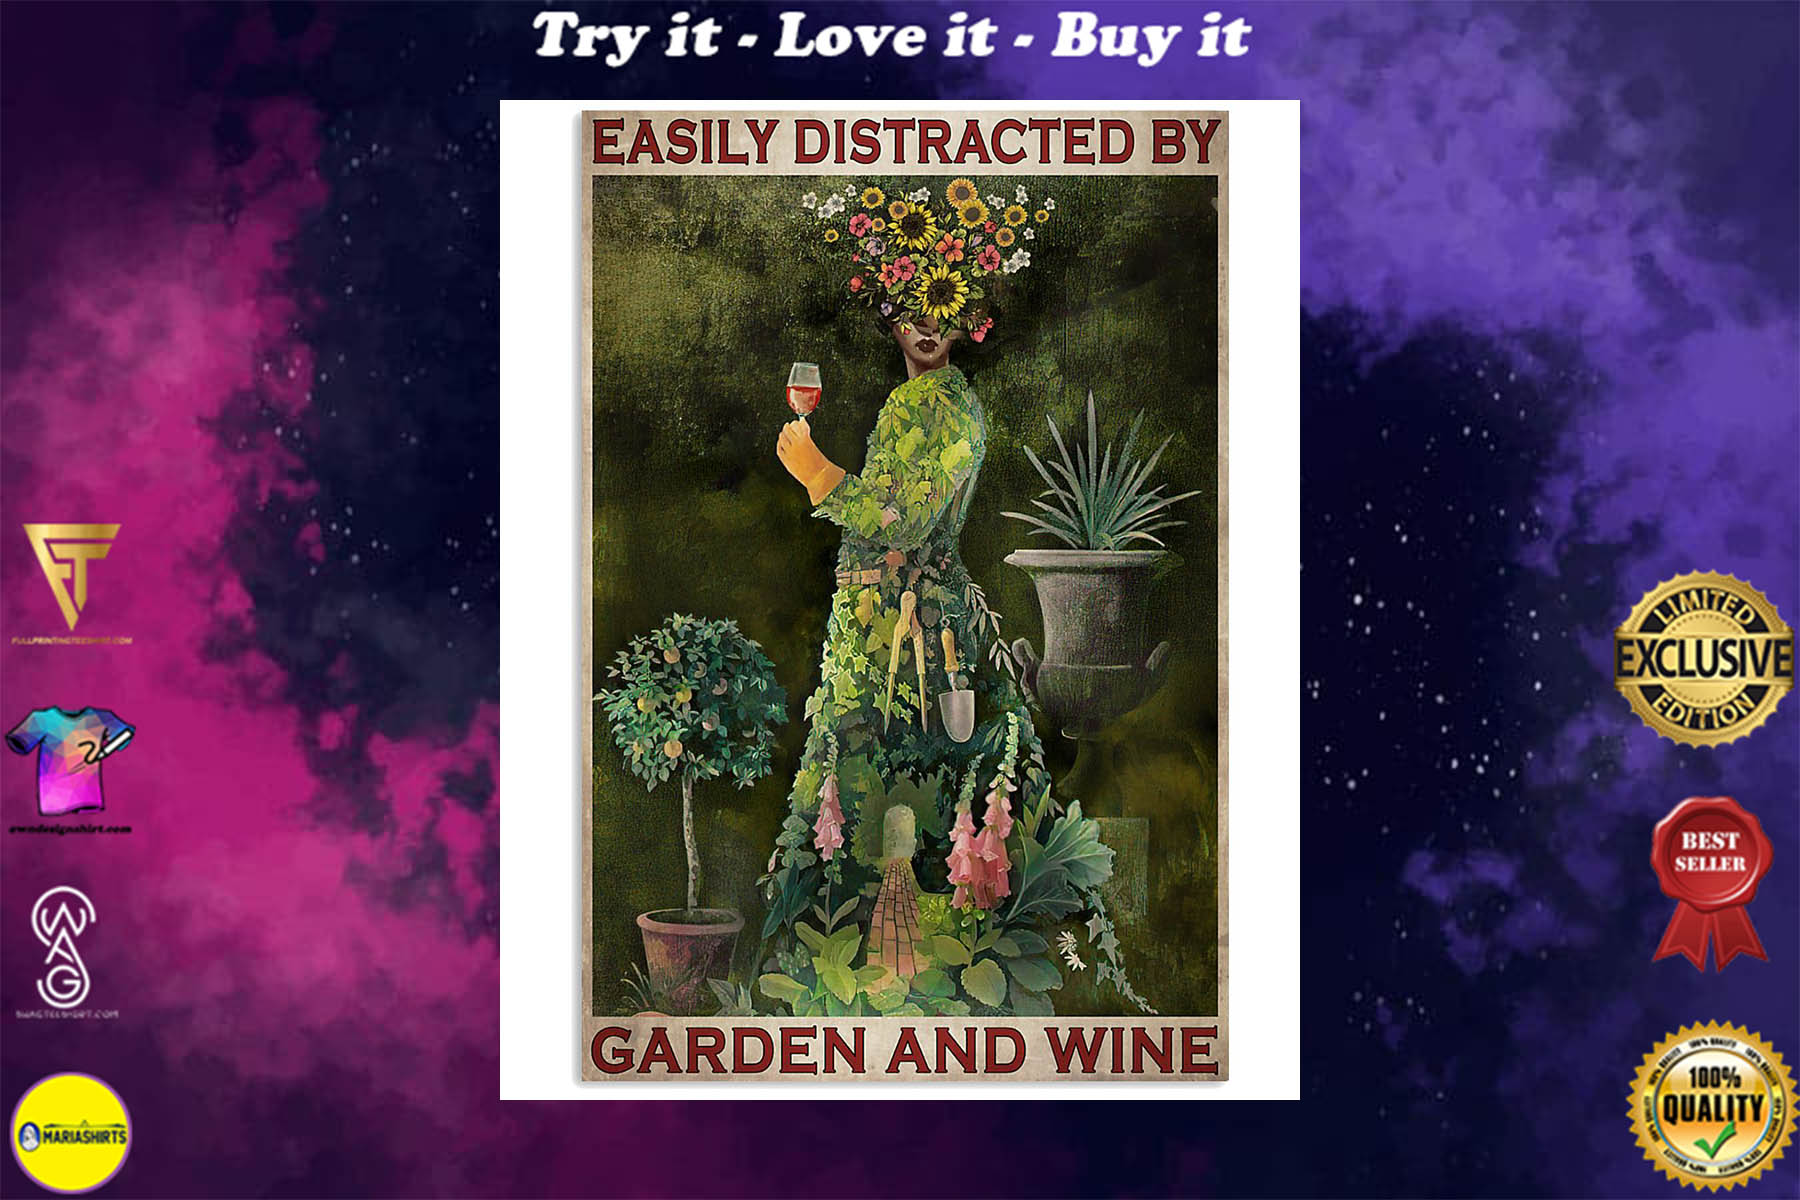 vintage garden girl easily distracted by garden and wine poster